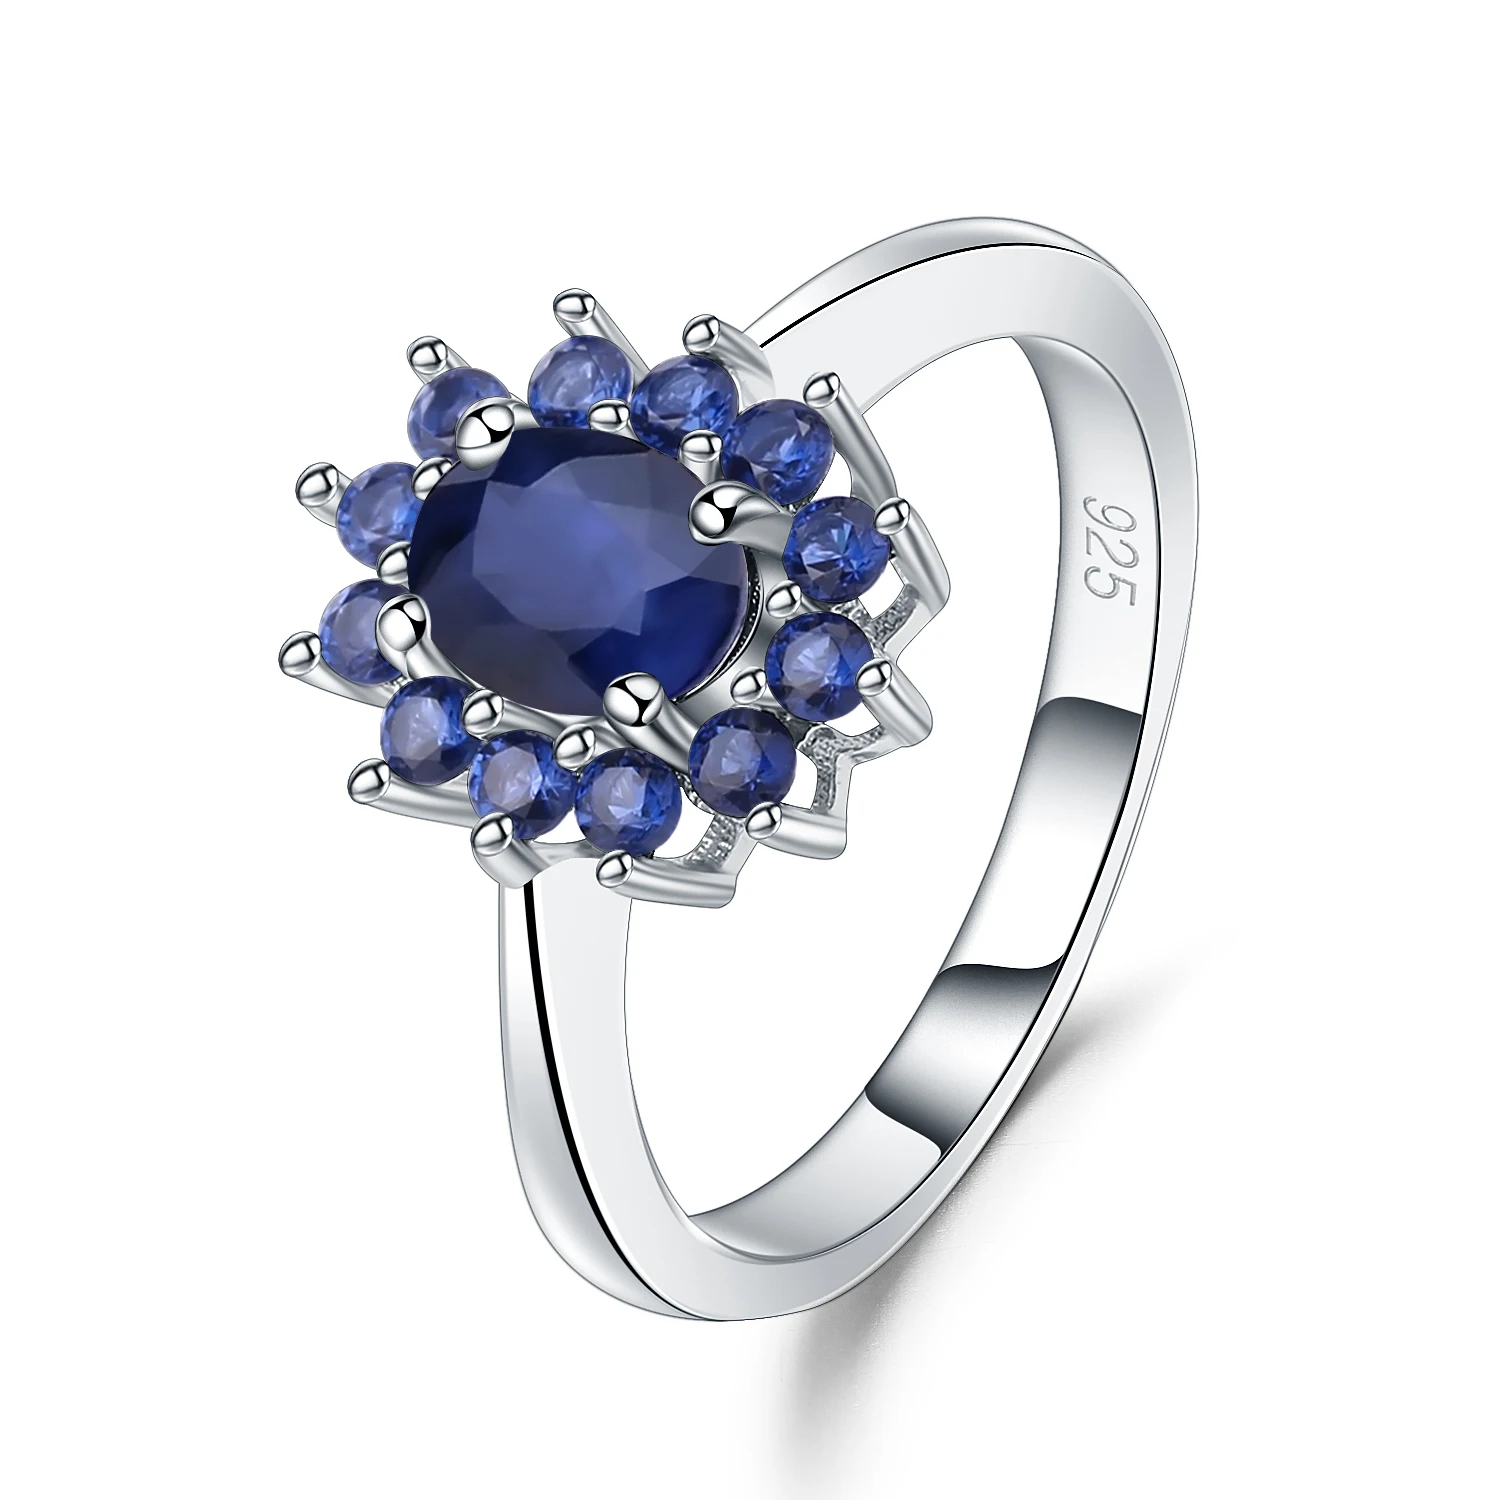 

Abiding Natural Blue Sapphire Classic Ring 925 Sterling Silver Gemstone Simple Ring For Women Wedding Fine Jewelry